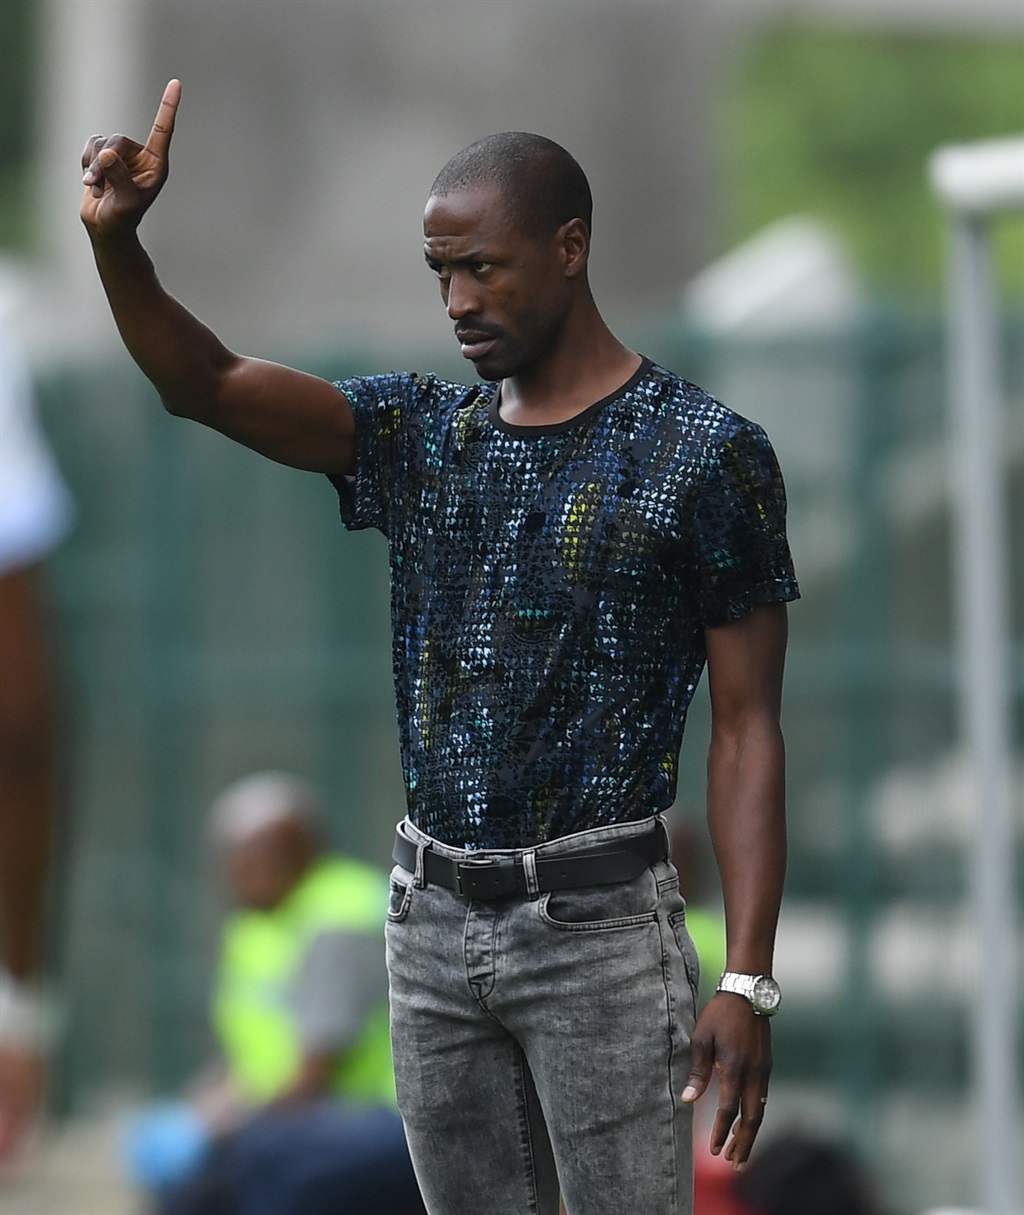 CAPE TOWN, SOUTH AFRICA - DECEMBER 01: Benson Mhlongo (head coach) of TS Sporting during the Nedbank Cup, NFD Qualifying match between Cape Umoya United and TS Sporting at Athlone Stadium on December 01, 2018 in Cape Town, South Africa. (Photo by Ashley Vlotman/Gallo Images)